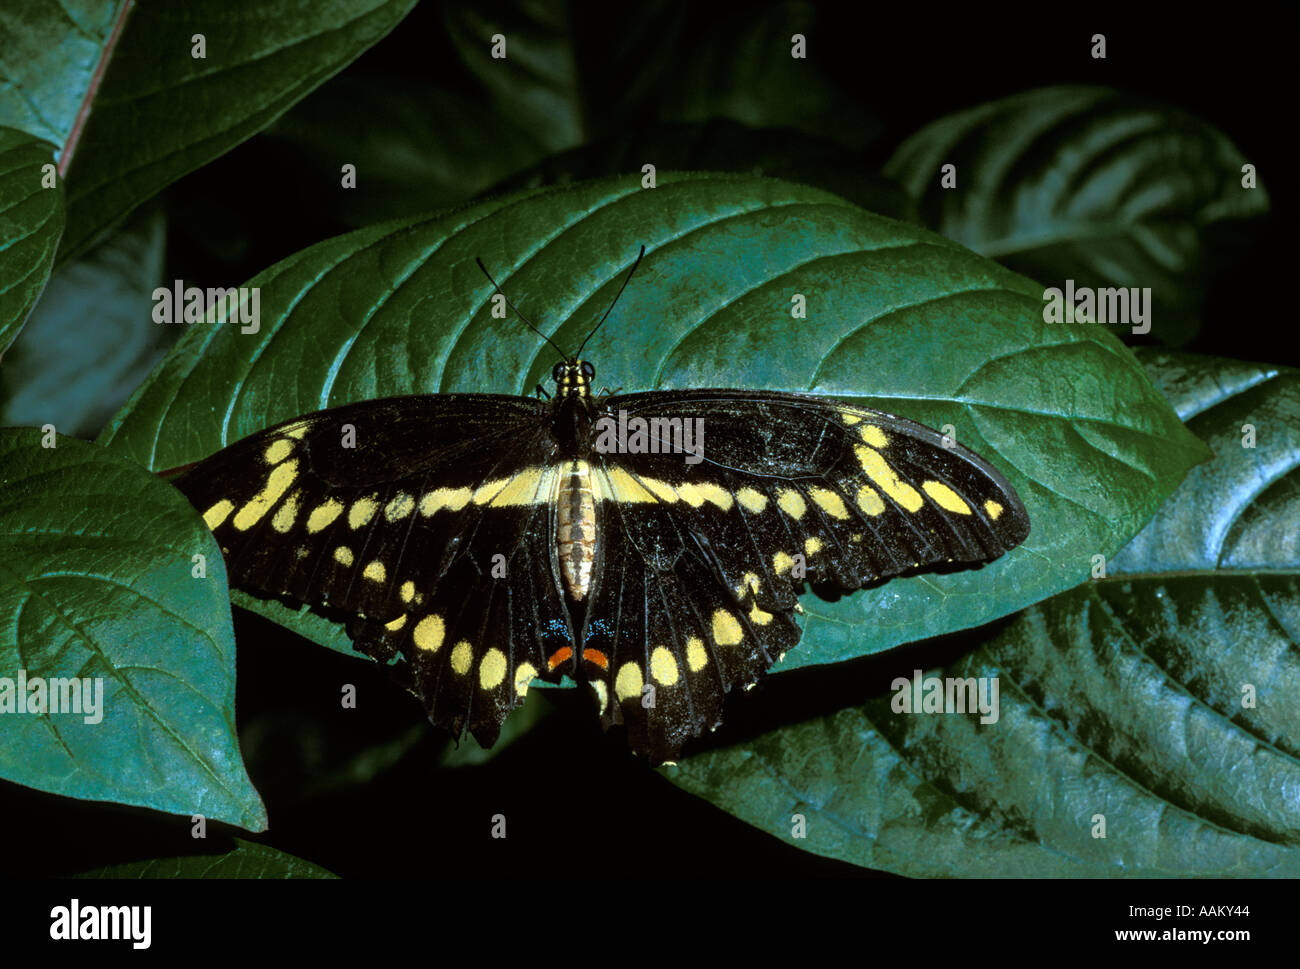 Giant Swallowtail butterfly Stock Photo